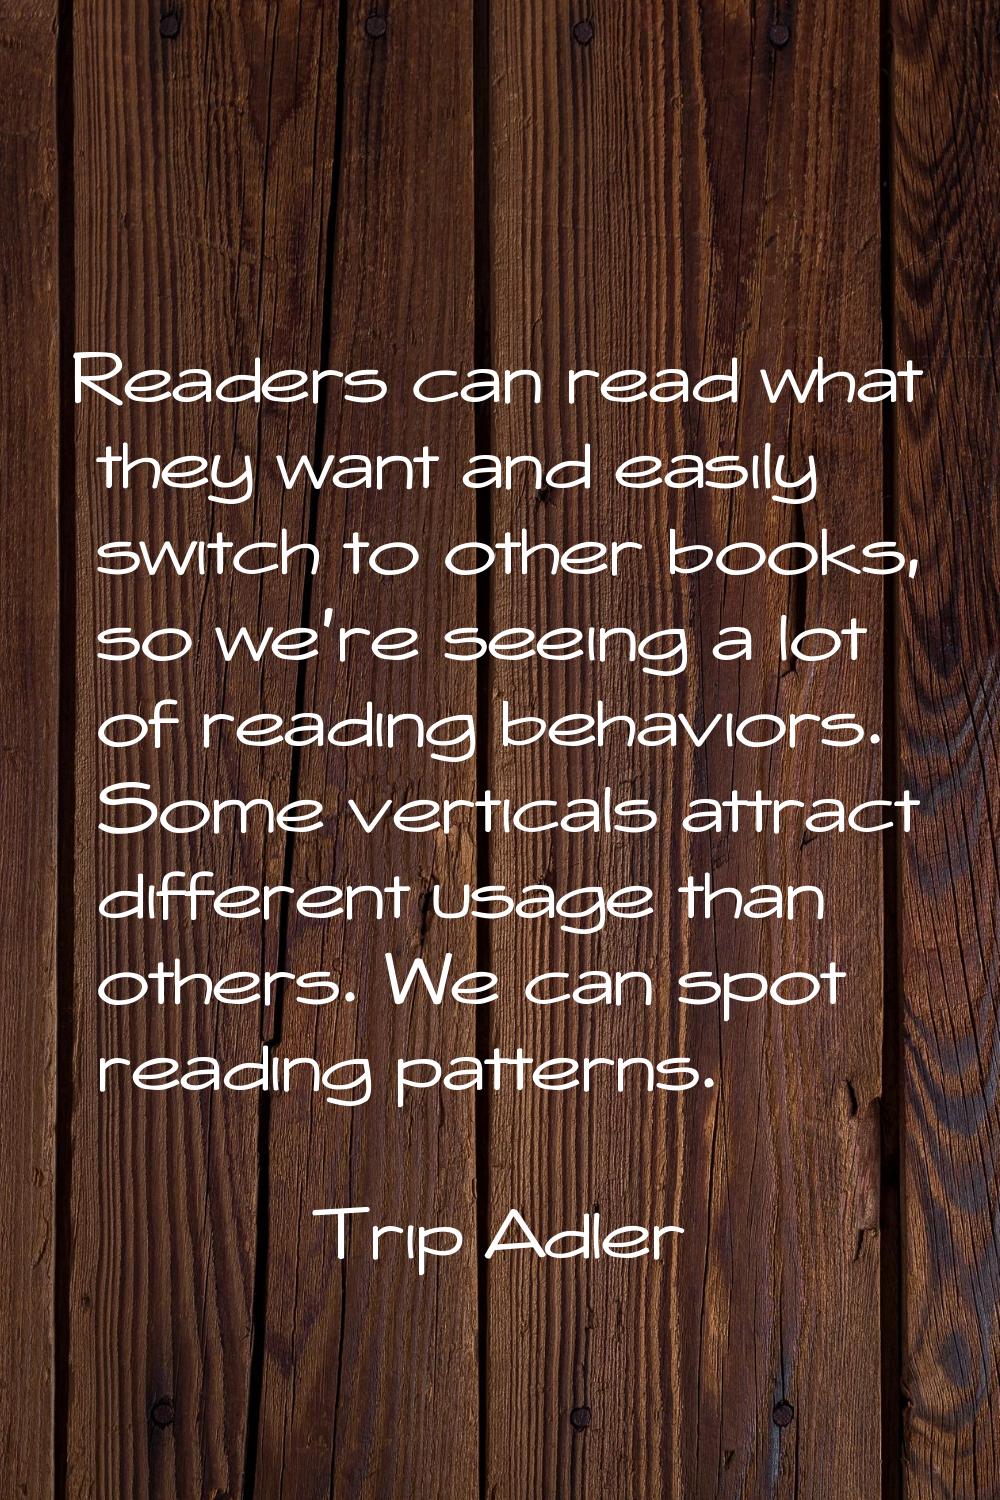 Readers can read what they want and easily switch to other books, so we're seeing a lot of reading 